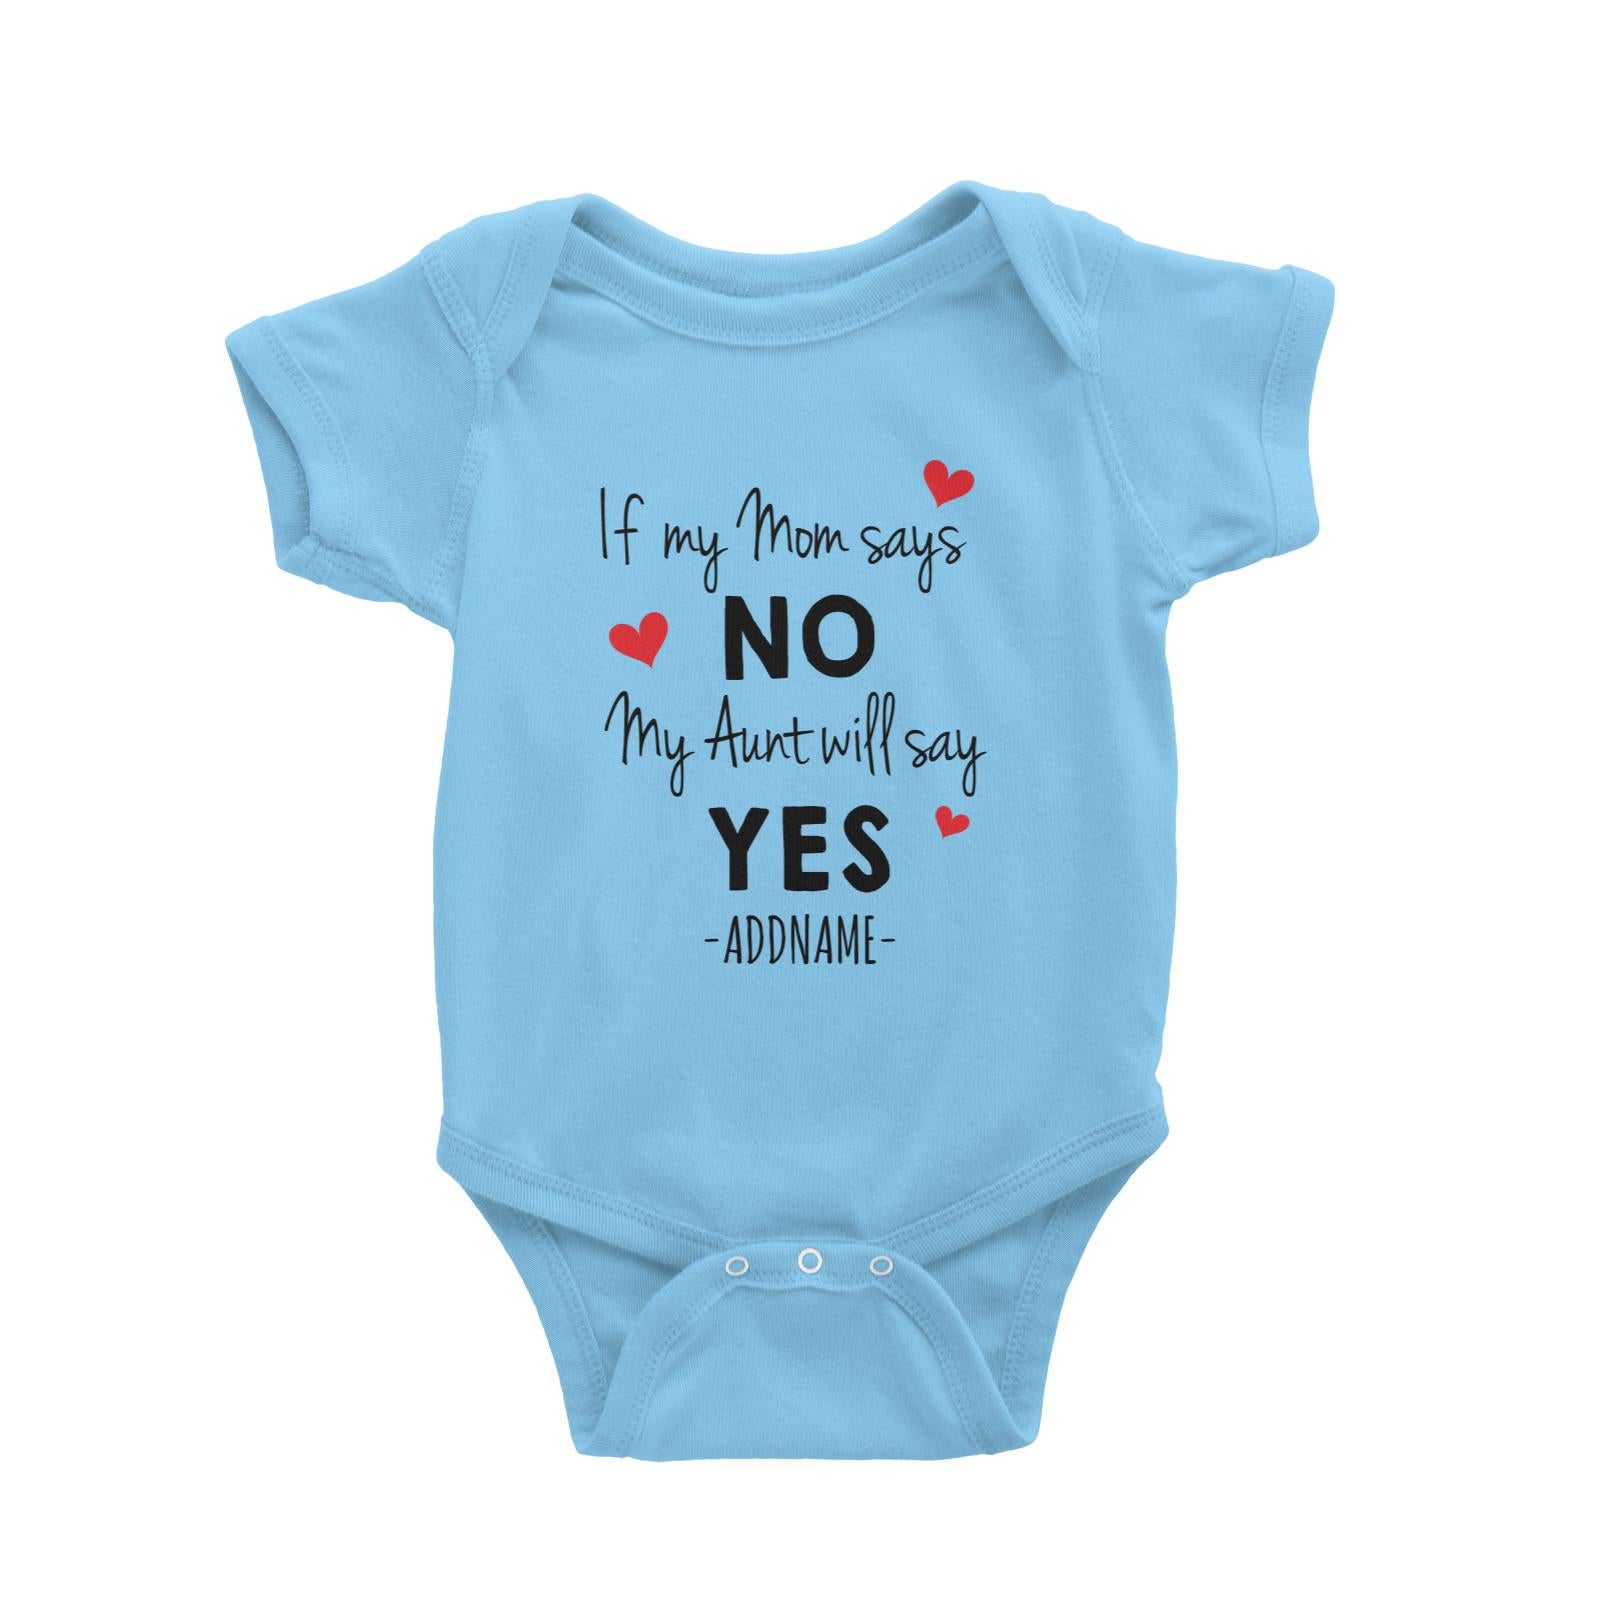 If My Mom Says No, My Aunt Will Say Yes Addname Baby Romper Personalizable Designs Basic Newborn